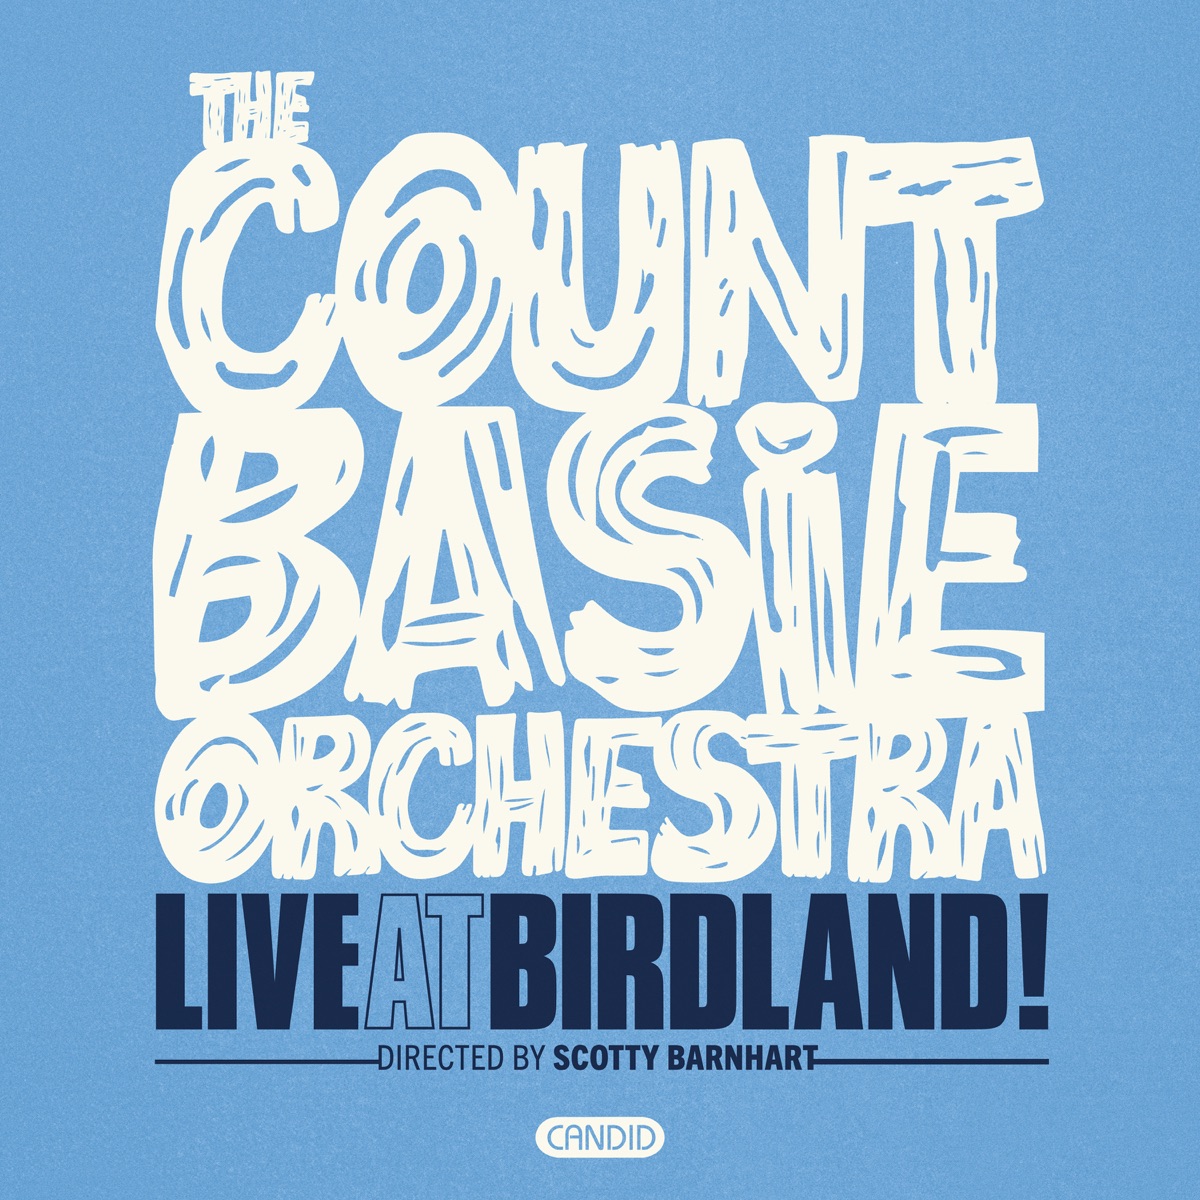 Live At Birdland - Album by The Count Basie Orchestra - Apple Music